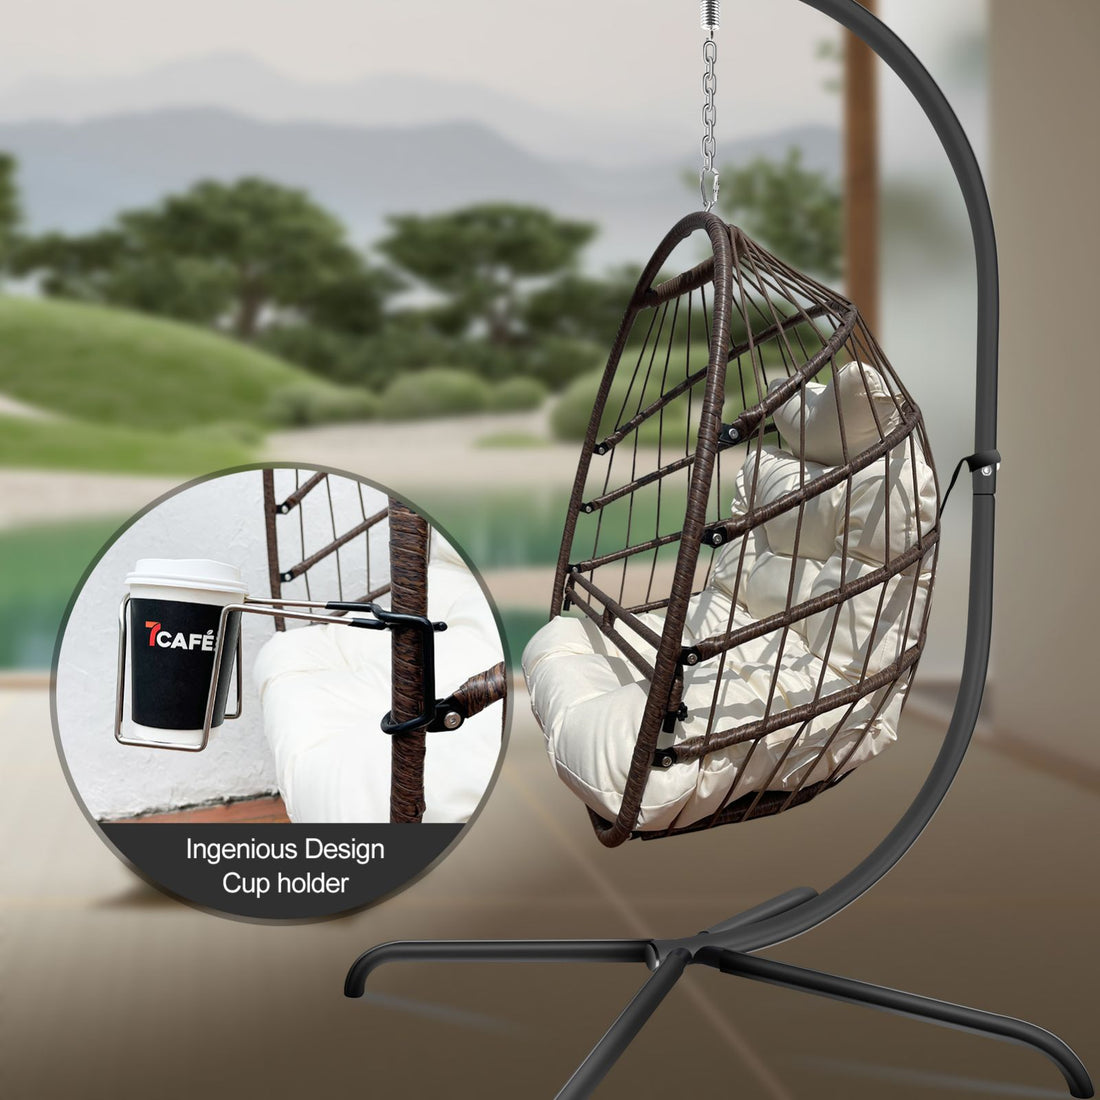 NEW Swing Egg Chair With Stand Indoor Outdoor, UV Resistant Cushion Hanging Chair With Guardrail And Cup Holder, Anti-Rust Foldable Aluminum Frame Hammock Chair, 350lbs Capacity For Porch Backyard